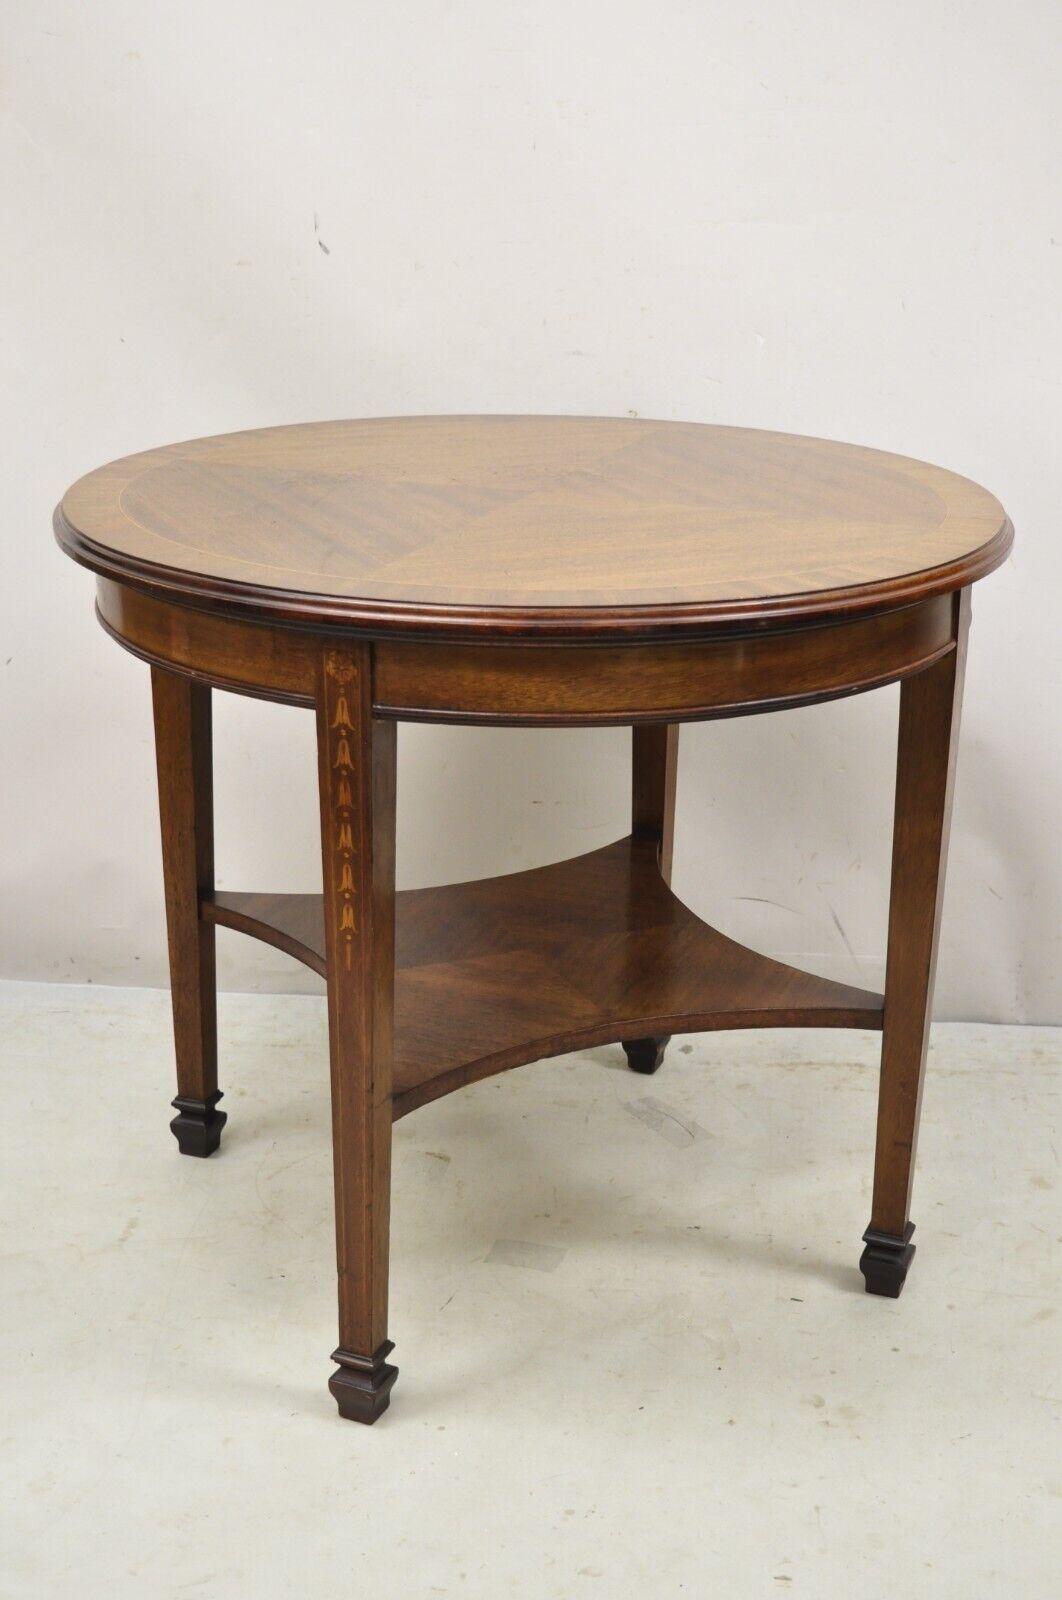 Antique mahogany Edwardian bellflower inlay round center table. Item features a sunburst inlaid top, bellflower inlay to legs, lower shelf, beautiful wood grain, very nice antique item. circa Early 20th century. Measurements: 28.5